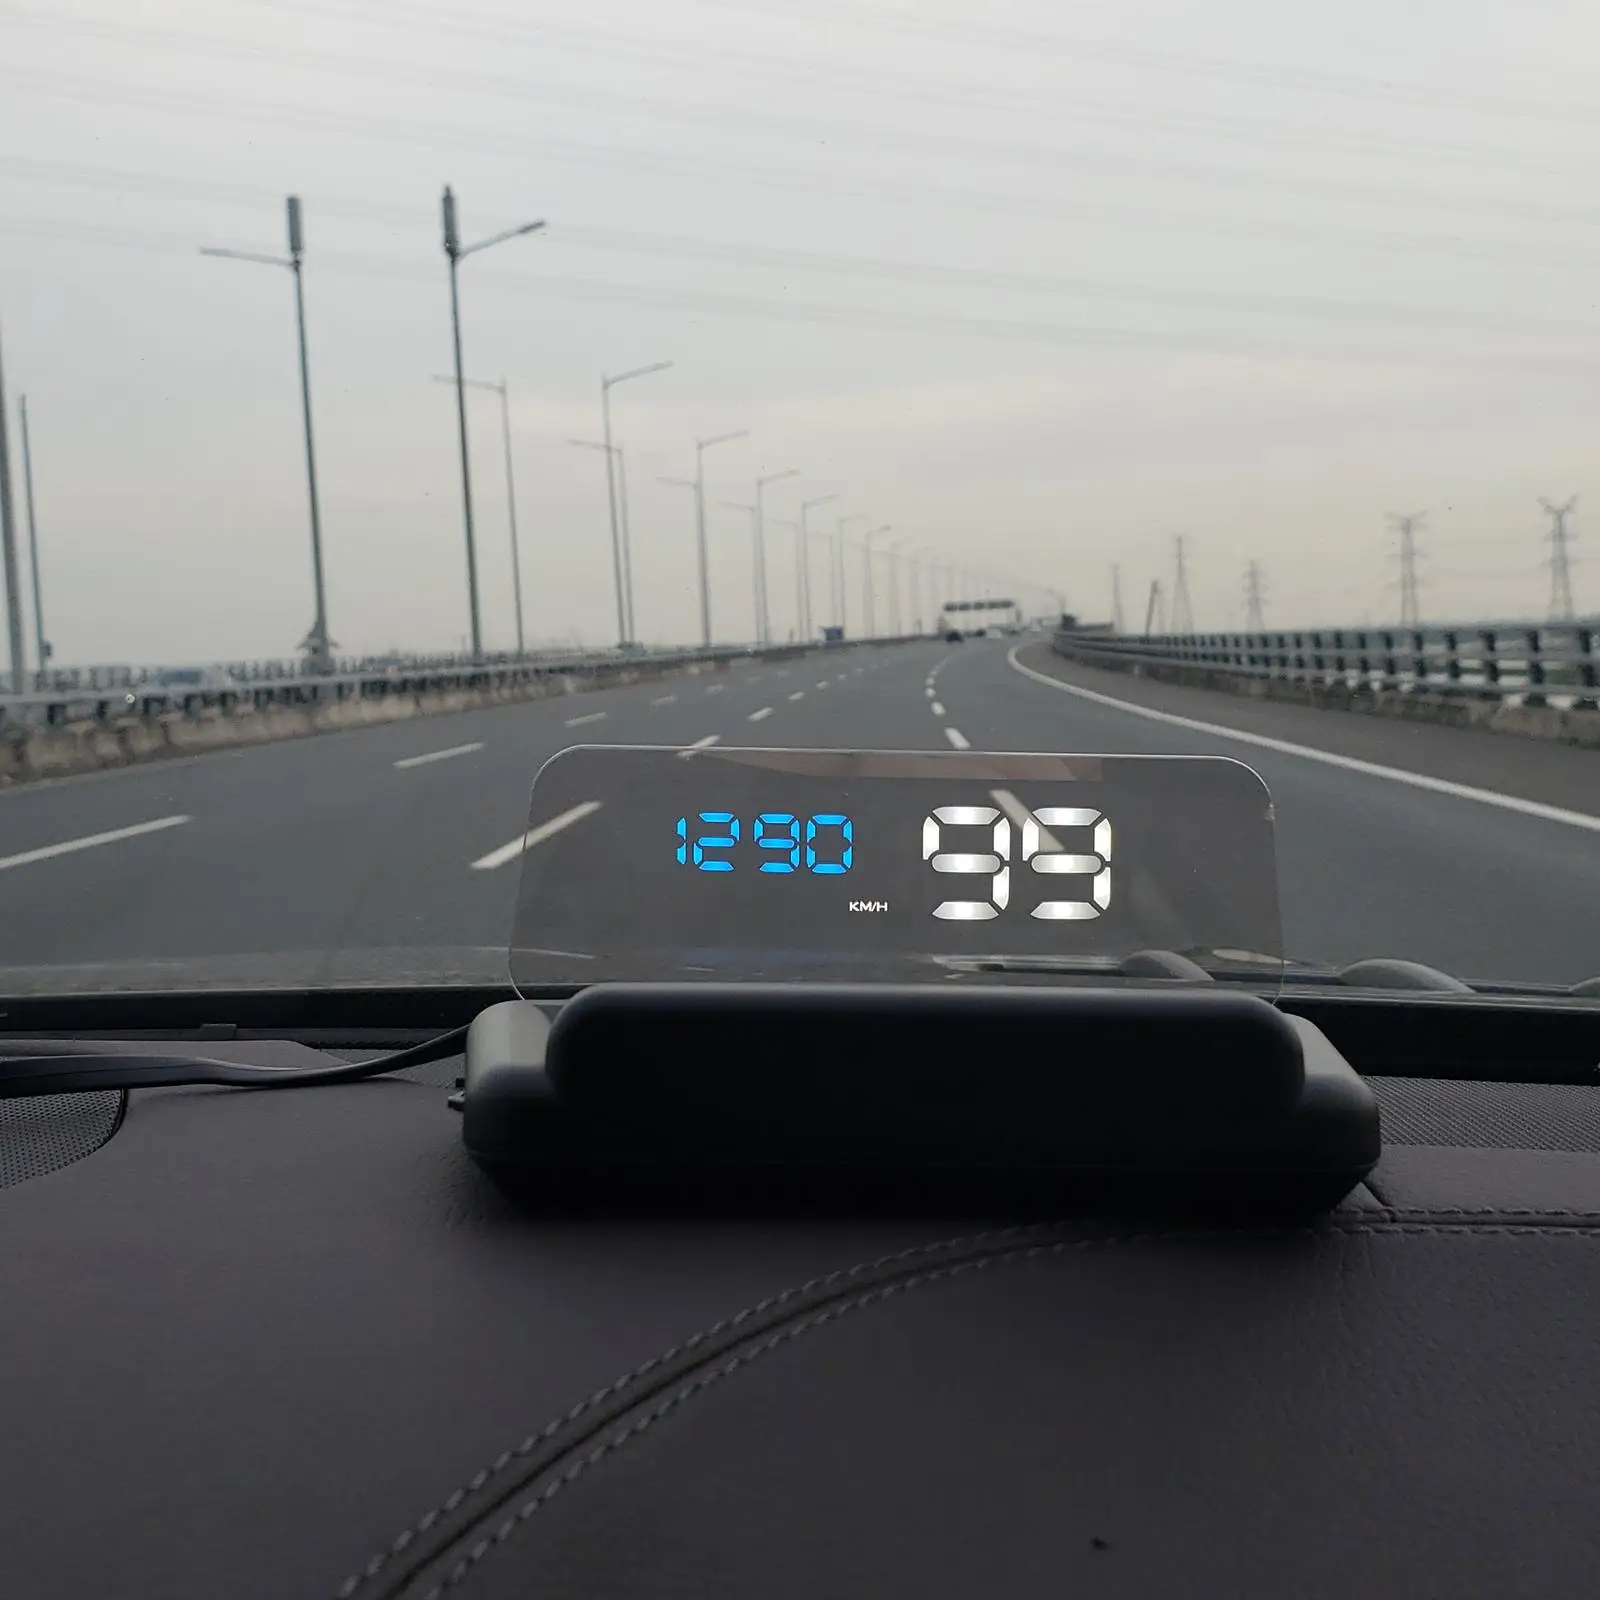 Car HUD  Display, Tired Alarm, Over  Alarm, Universal  ometer, Screen,  with 